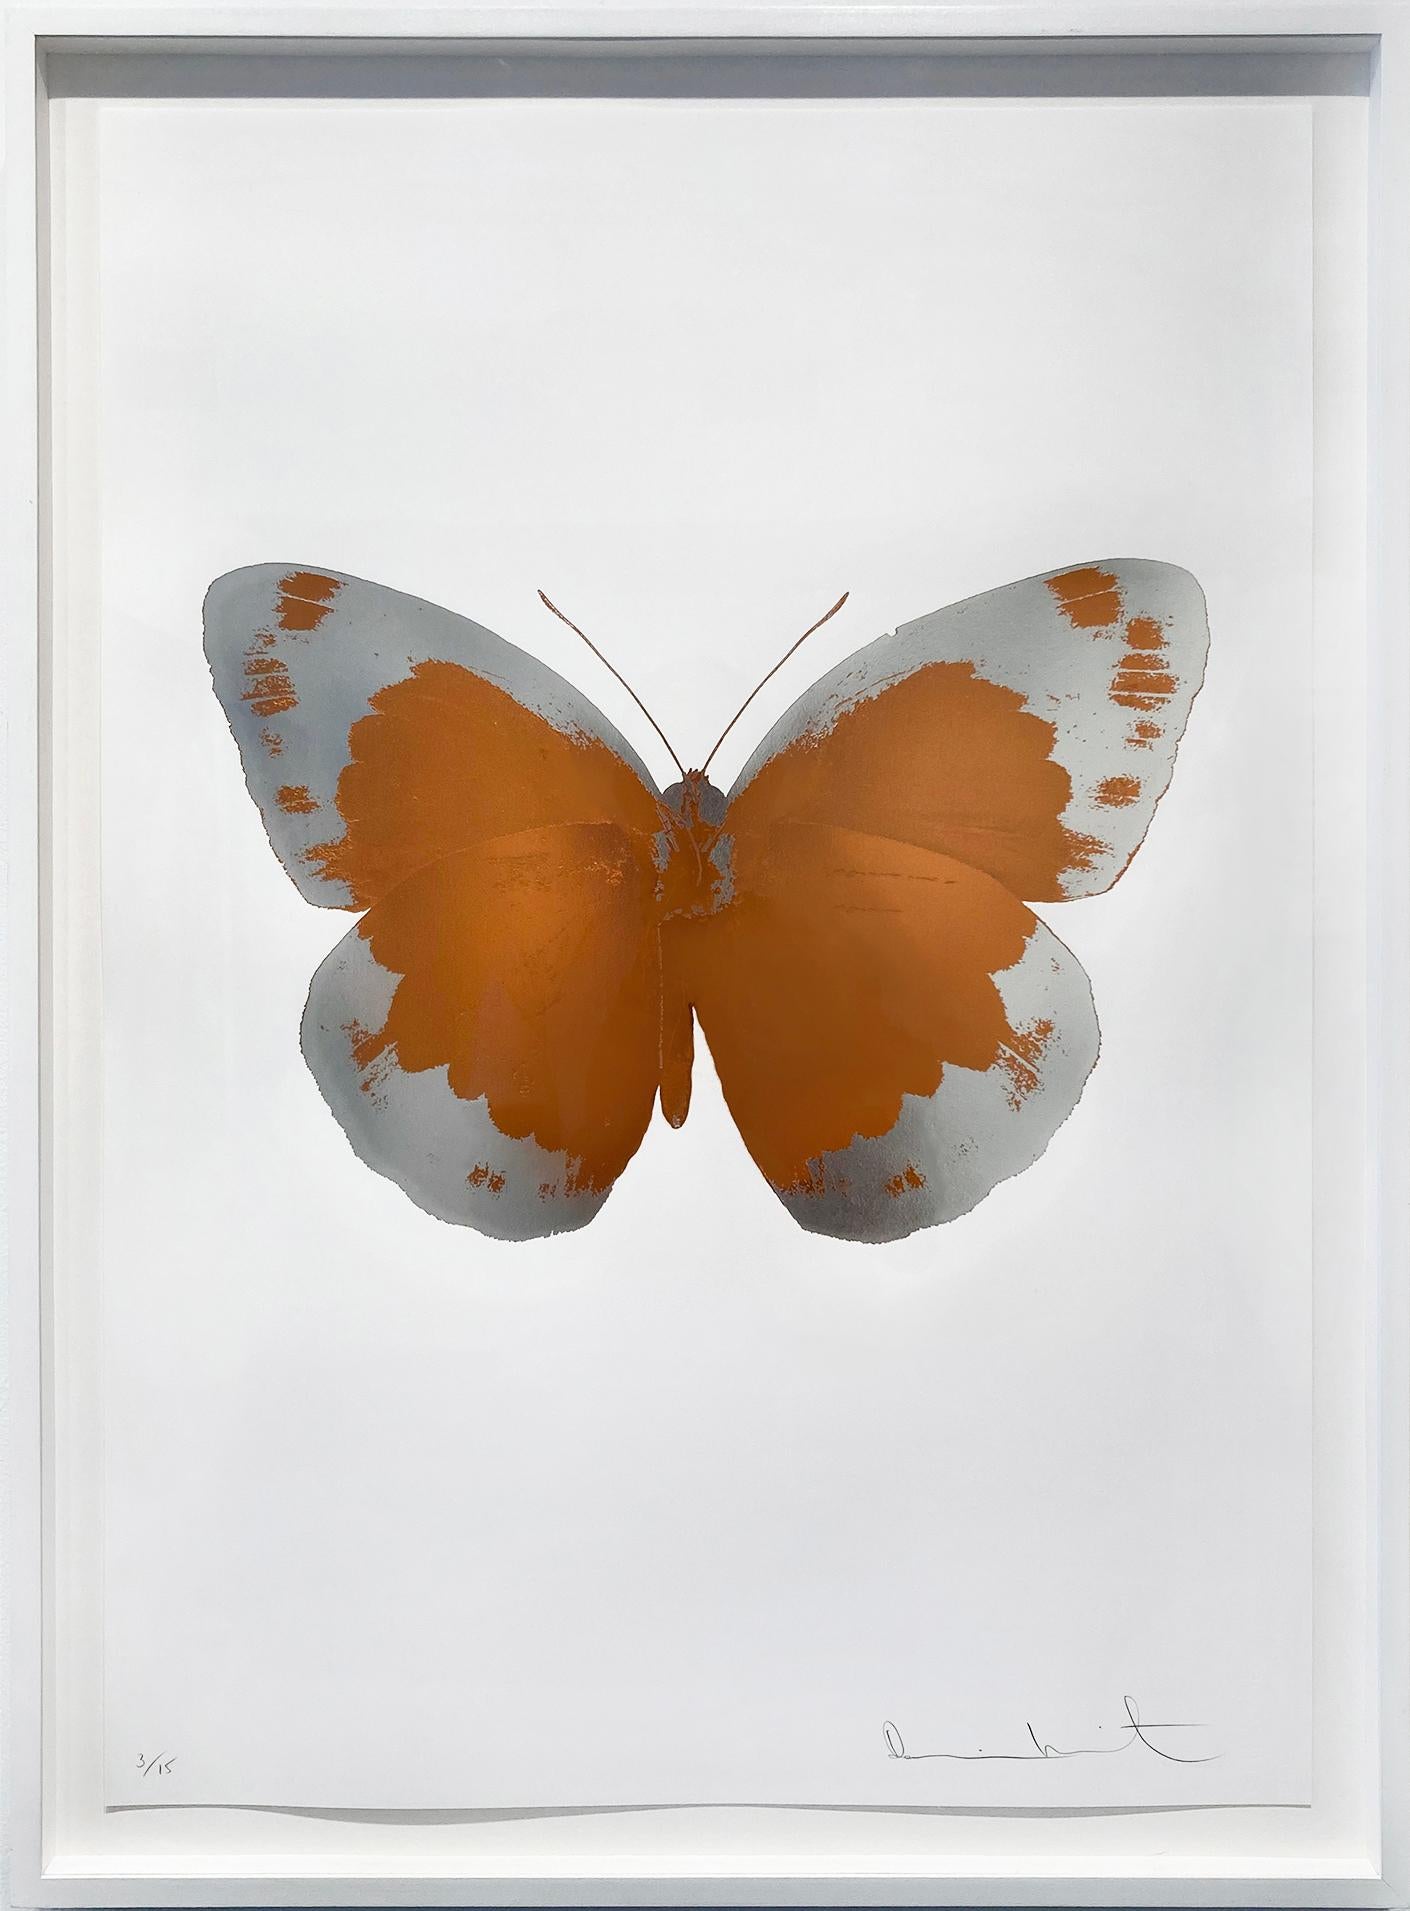 The Souls II - Prairie Copper/Silver Gloss - Print by Damien Hirst